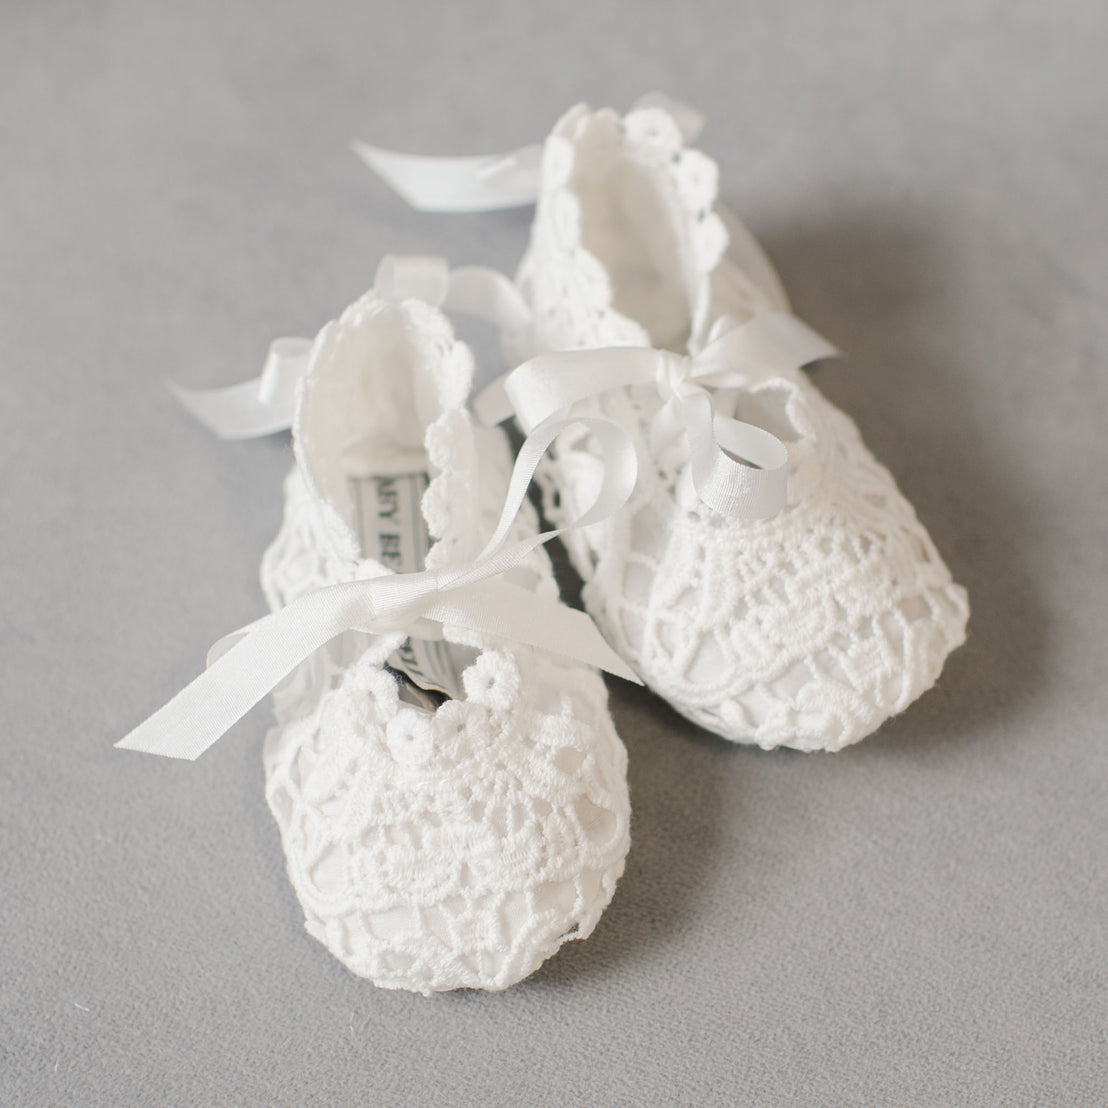 A pair of delicate Grace Lace Booties with ribbon ties on a soft gray background.